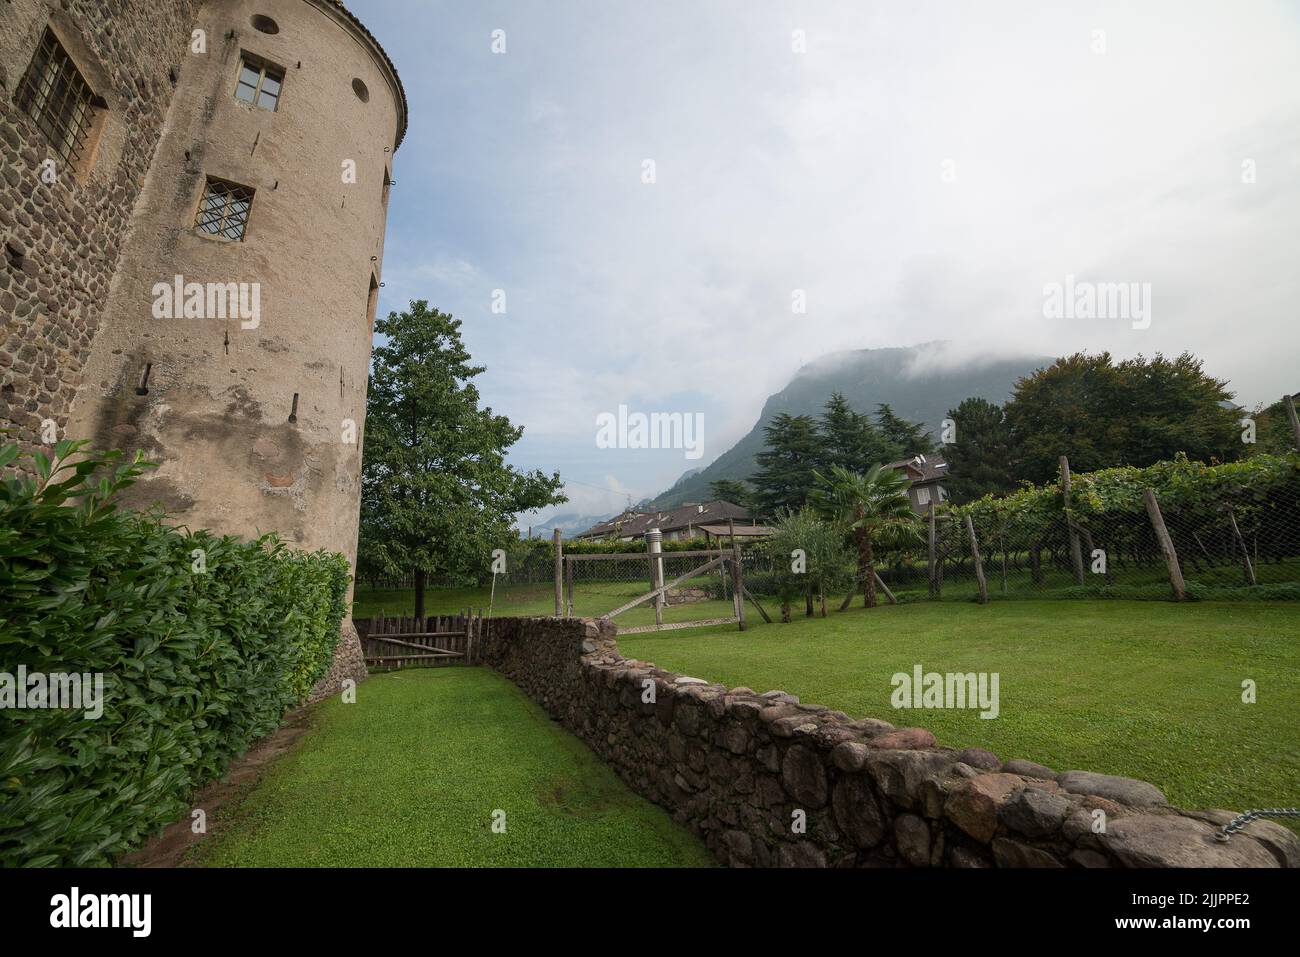 A beautiful backyard of a historic stone building with a misty mountain in the background Stock Photo